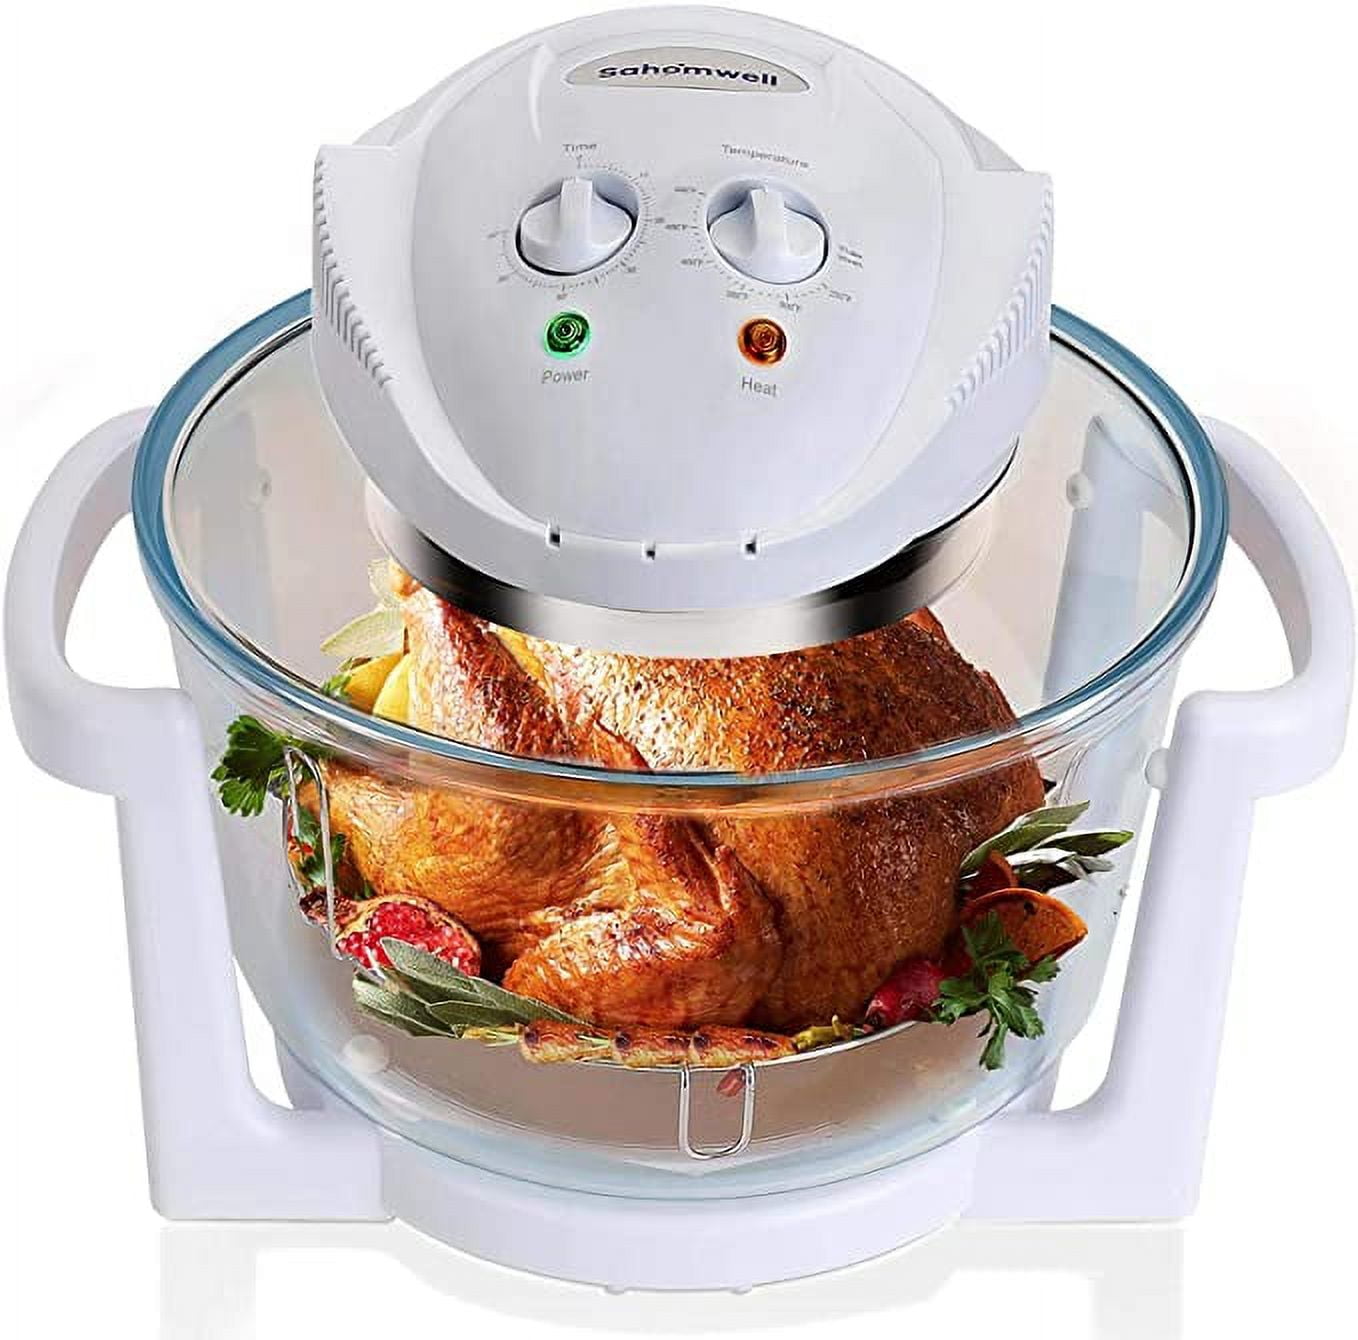 Aroma Glass Air Fryer and Countertop Convection Oven with Powerful 360Crispy Technology (3 quart)